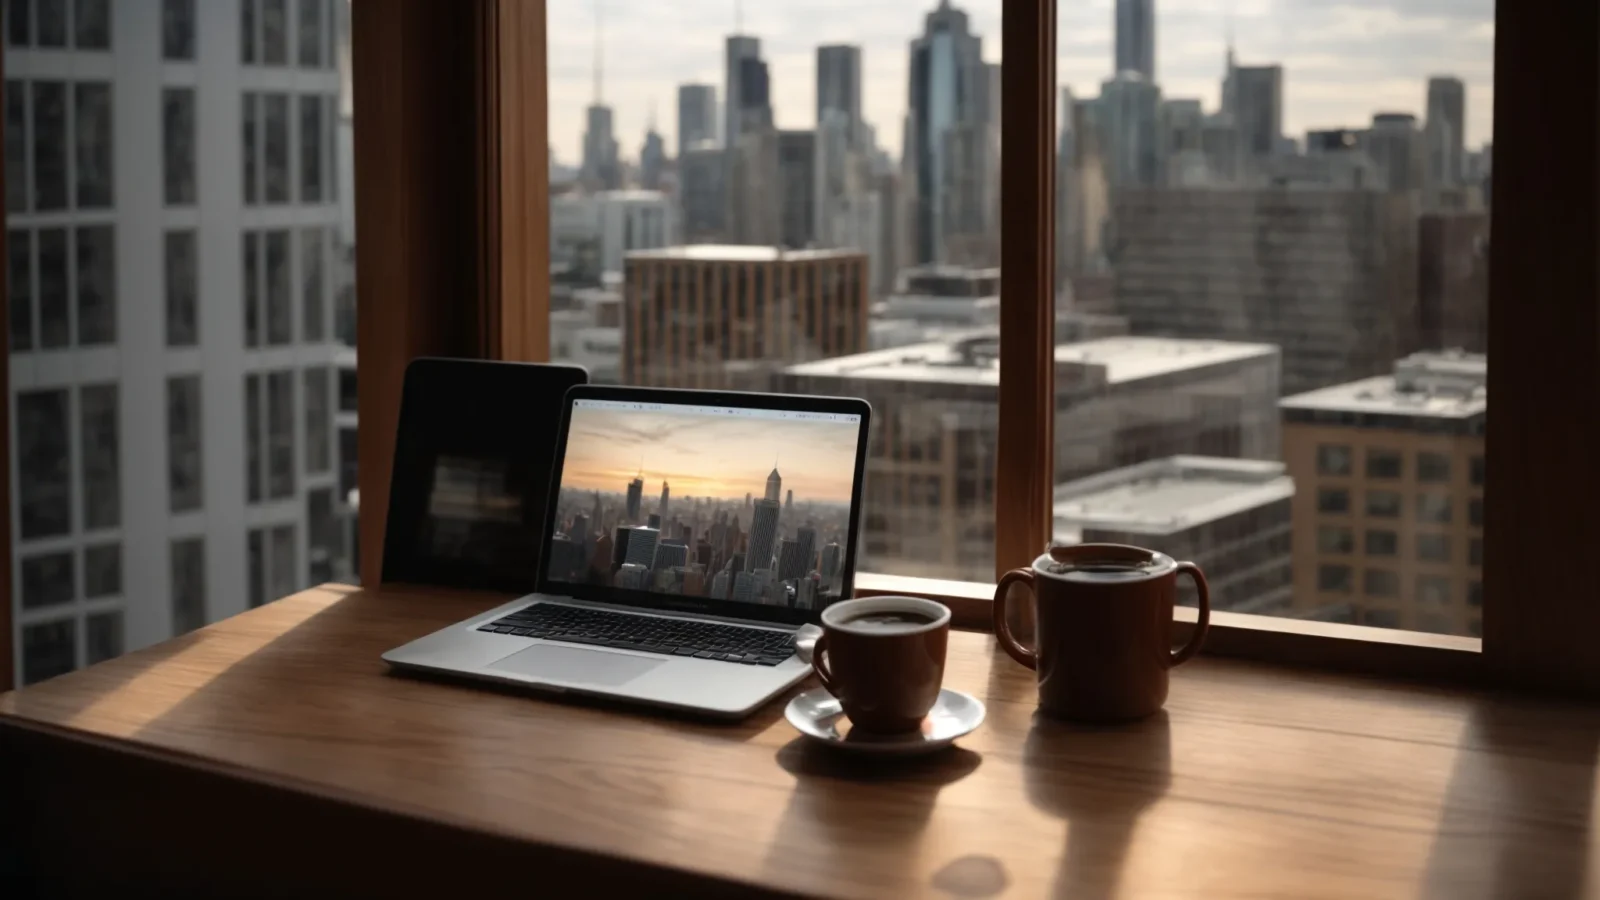 a laptop, a coffee mug, and a notebook on a wooden desk with a window showing a city view in the background.